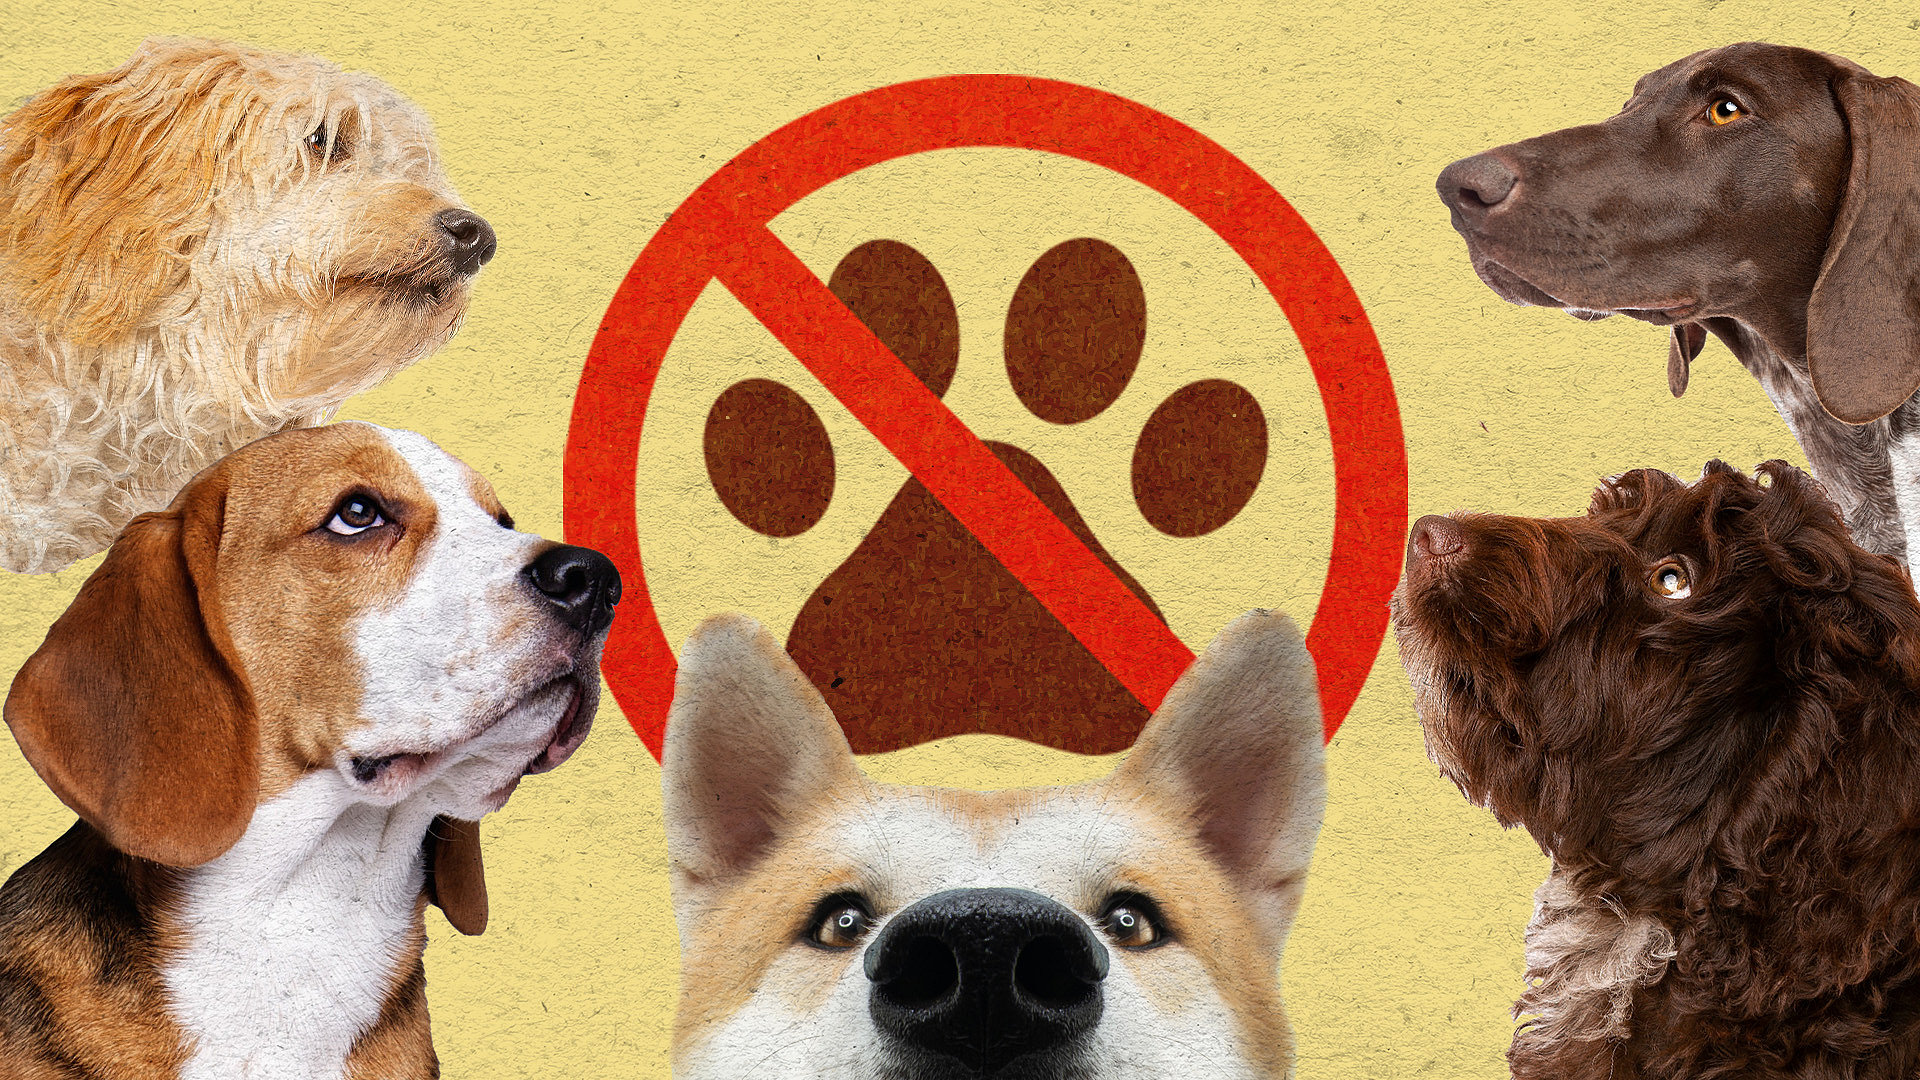 Five different breeds of dog around the border of the image, looking into the centre at a no to dogs sign